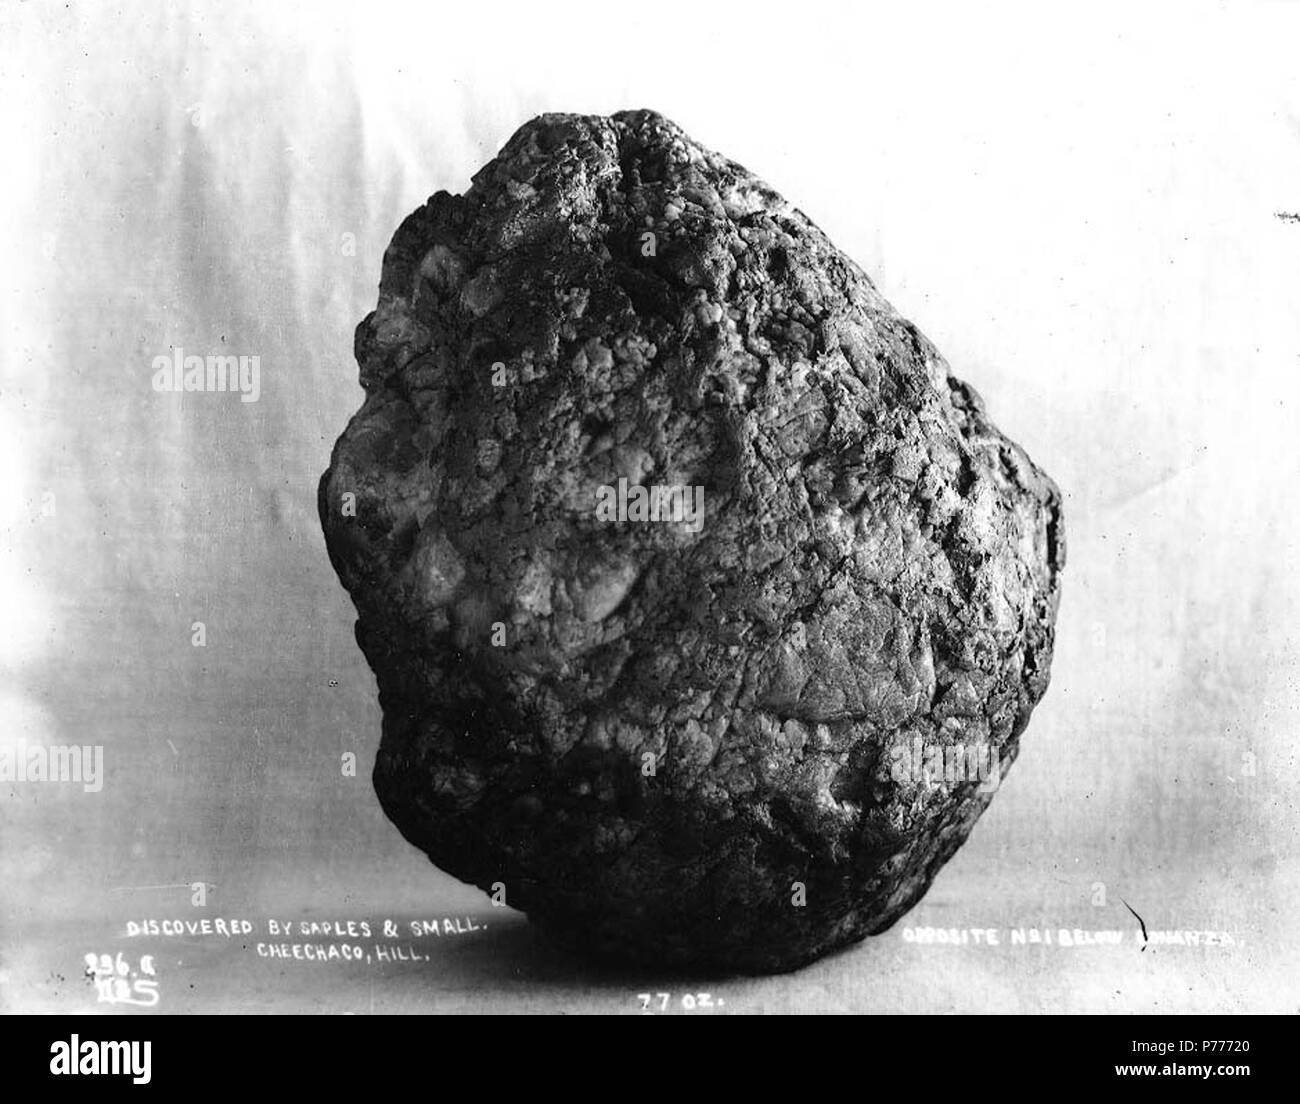 . English: Gold nugget weighing 77 ounces discovered on Cheechako Hill, Yukon Territory, ca. 1898. English: Caption on image: 'Discovered by Saples and Small. Cheechaco Hill. Opposite no 1 below Bonanza. 77 oz.' Original image in Hegg Album 25, page 43 . Original photograph by Eric A. Hegg 816; copied by Webster and Stevens 236.A . Klondike Gold Rush. Subjects (LCTGM): Gold--Yukon--Cheechako Hill Subjects (LCSH): Yukon--Gold discoveries  . circa 1898 5 Gold nugget weighing 77 ounces discovered on Cheechako Hill, Yukon Territory, ca 1898 (HEGG 356) Stock Photo